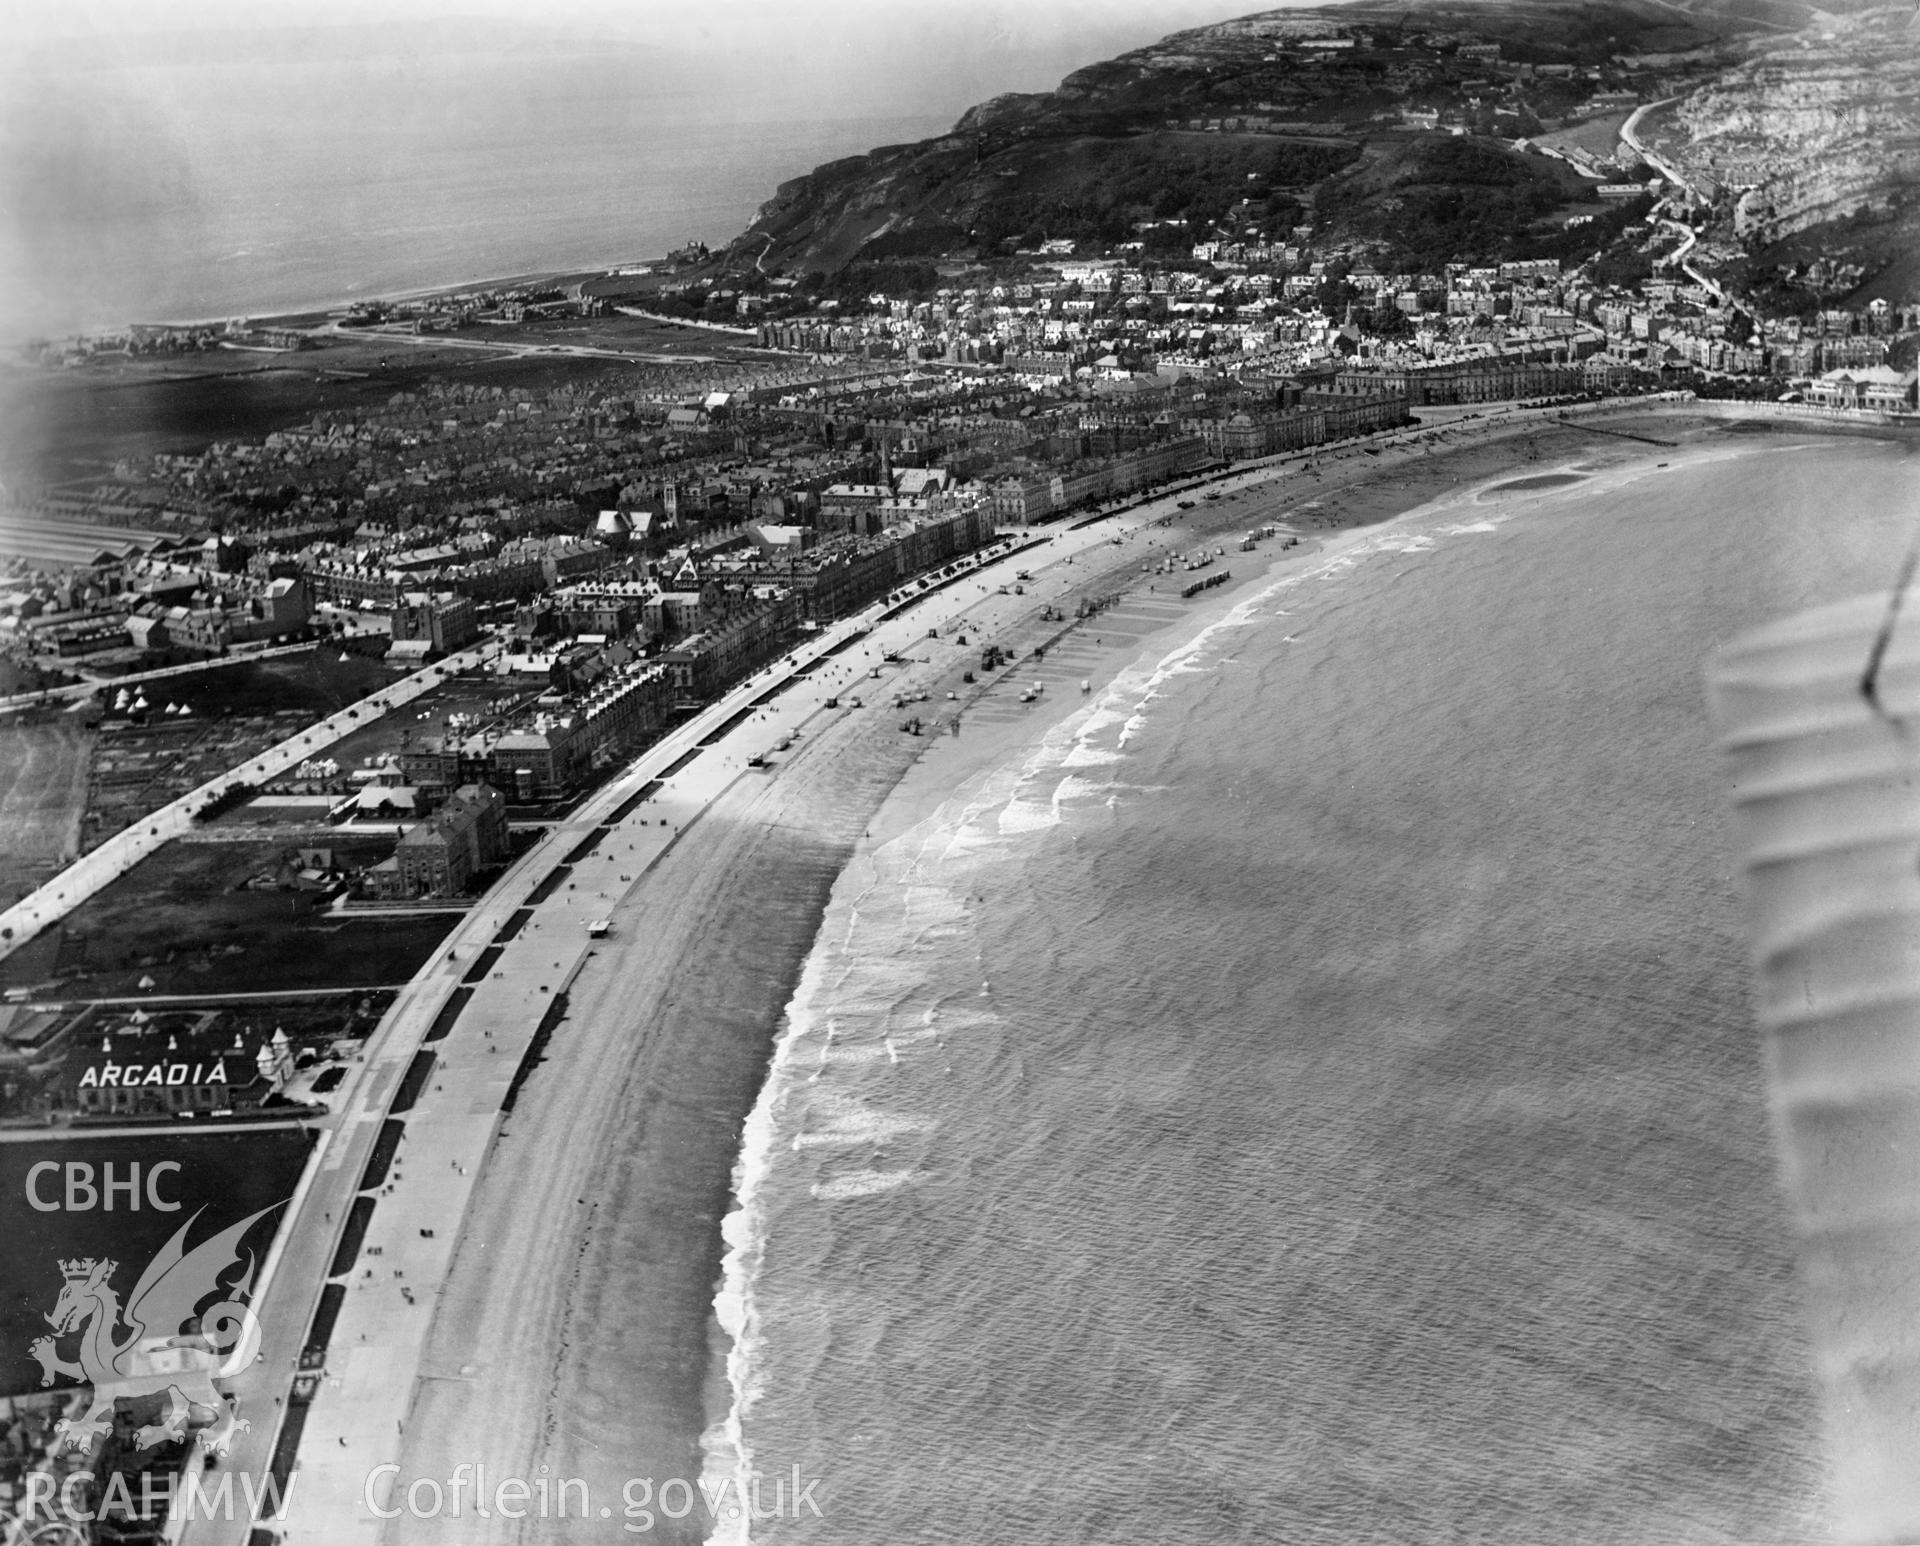 General view of Llandudno, oblique aerial view. 5?x4? black and white glass plate negative.